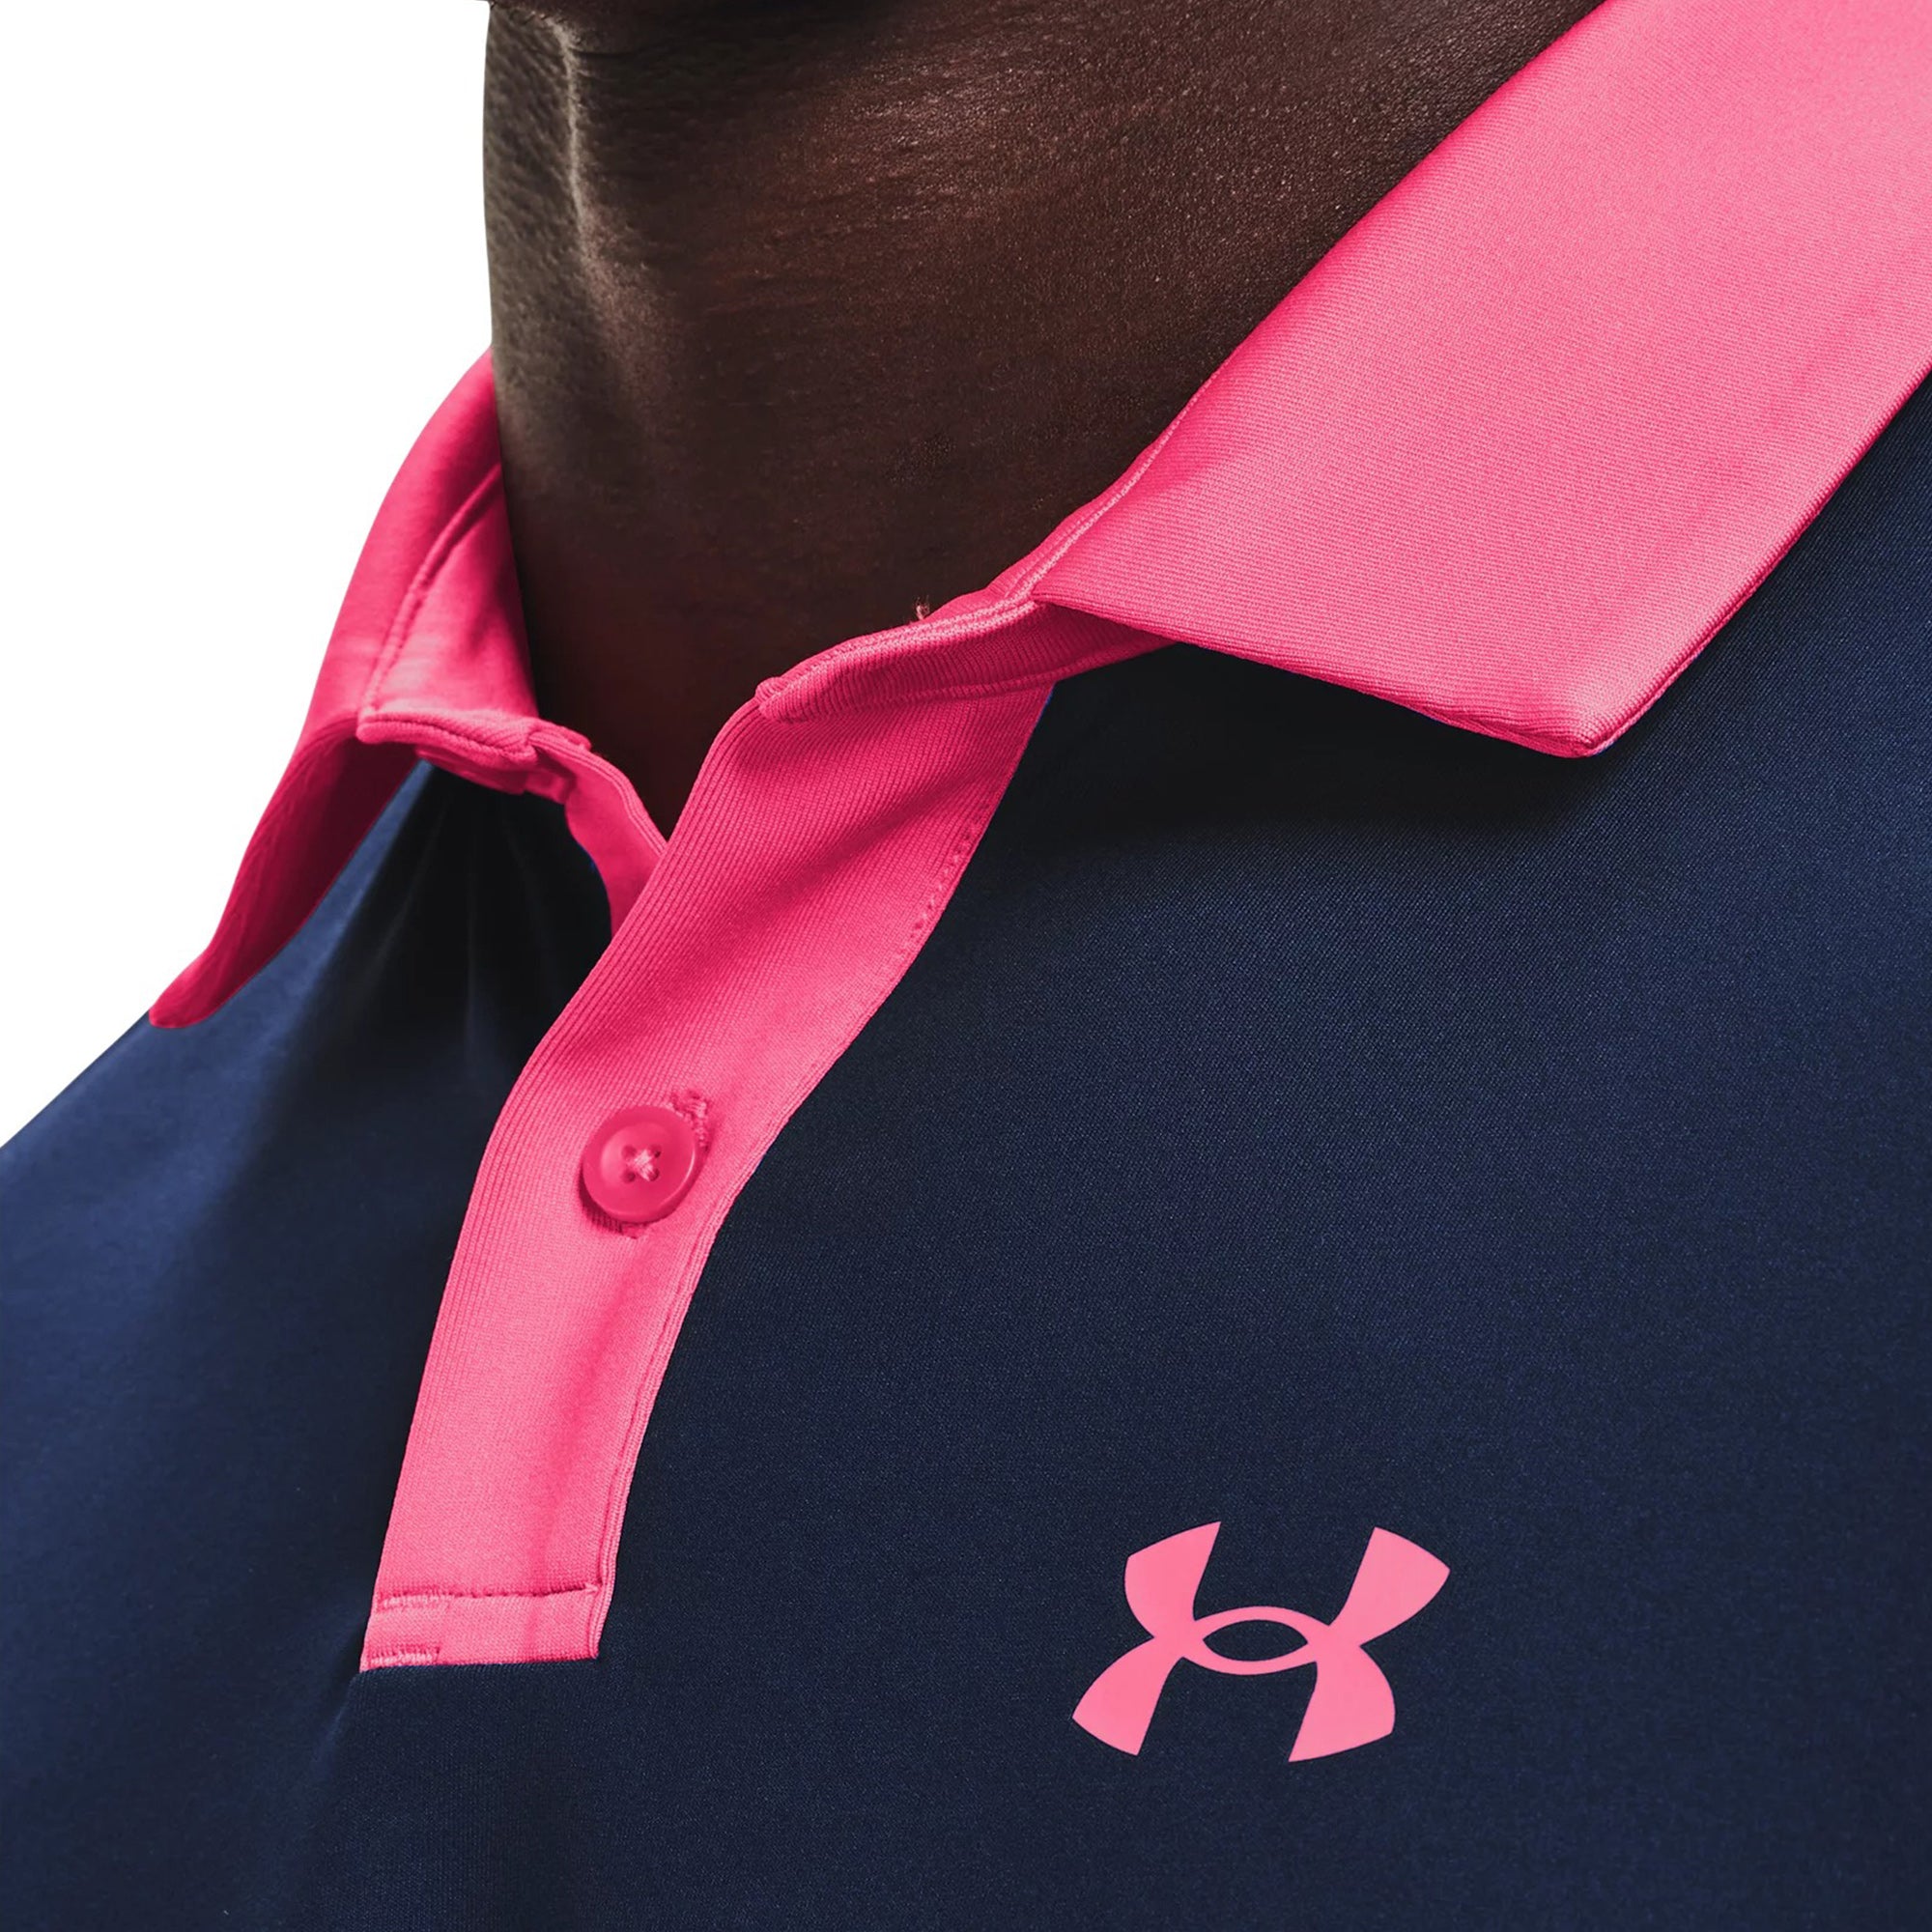 Áo Polo Tay Ngắn Nam Under Armour T2G Blocked - Supersports Vietnam